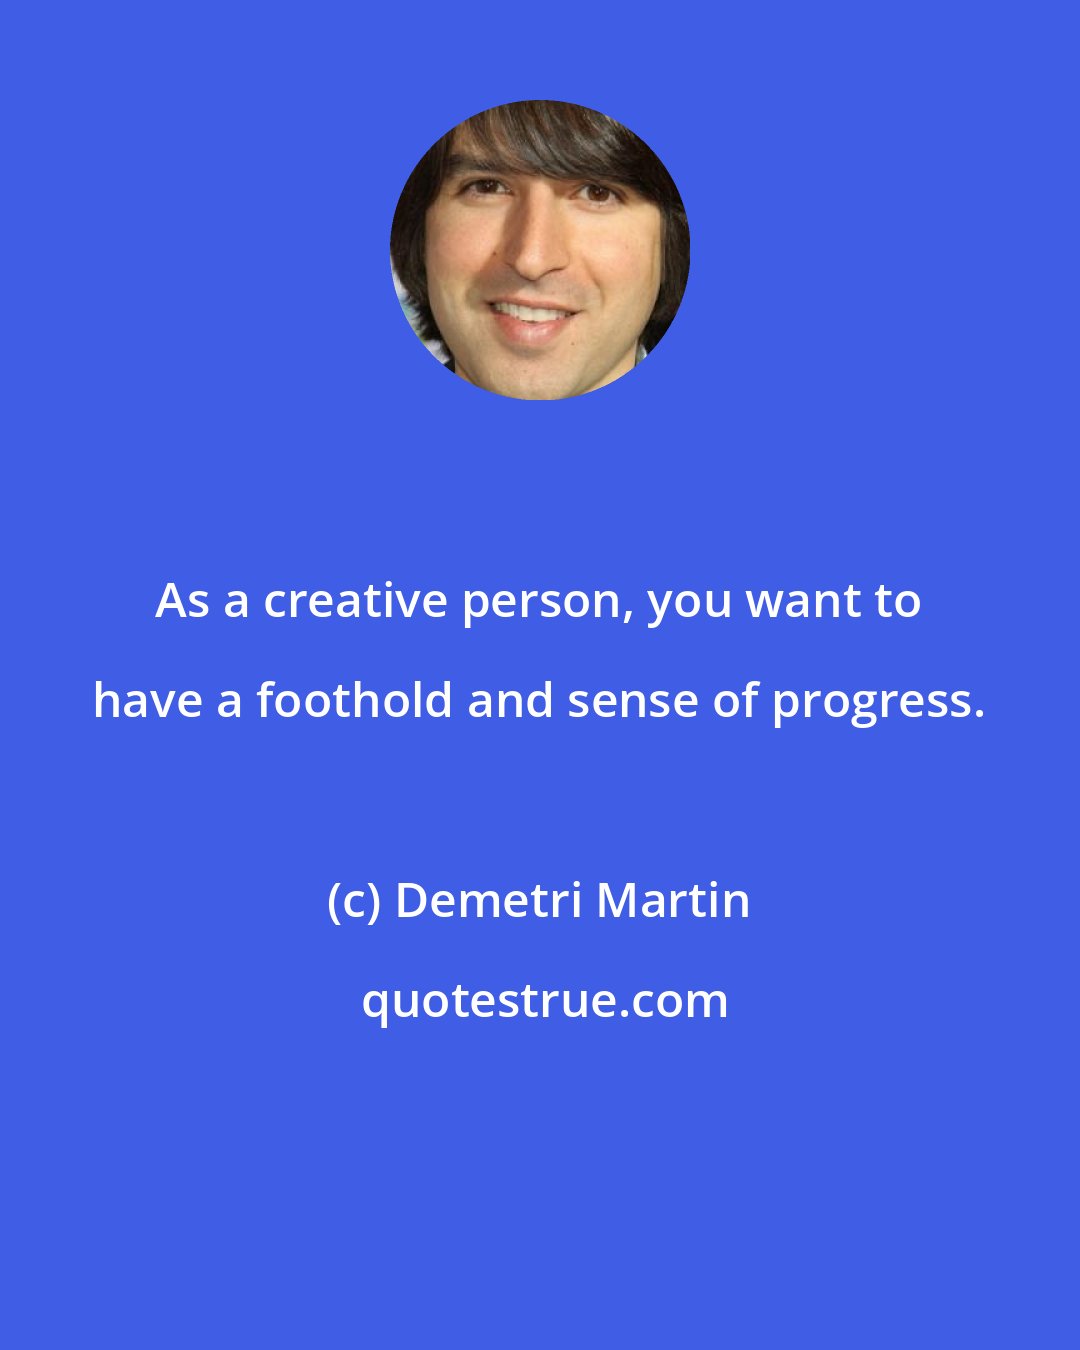 Demetri Martin: As a creative person, you want to have a foothold and sense of progress.